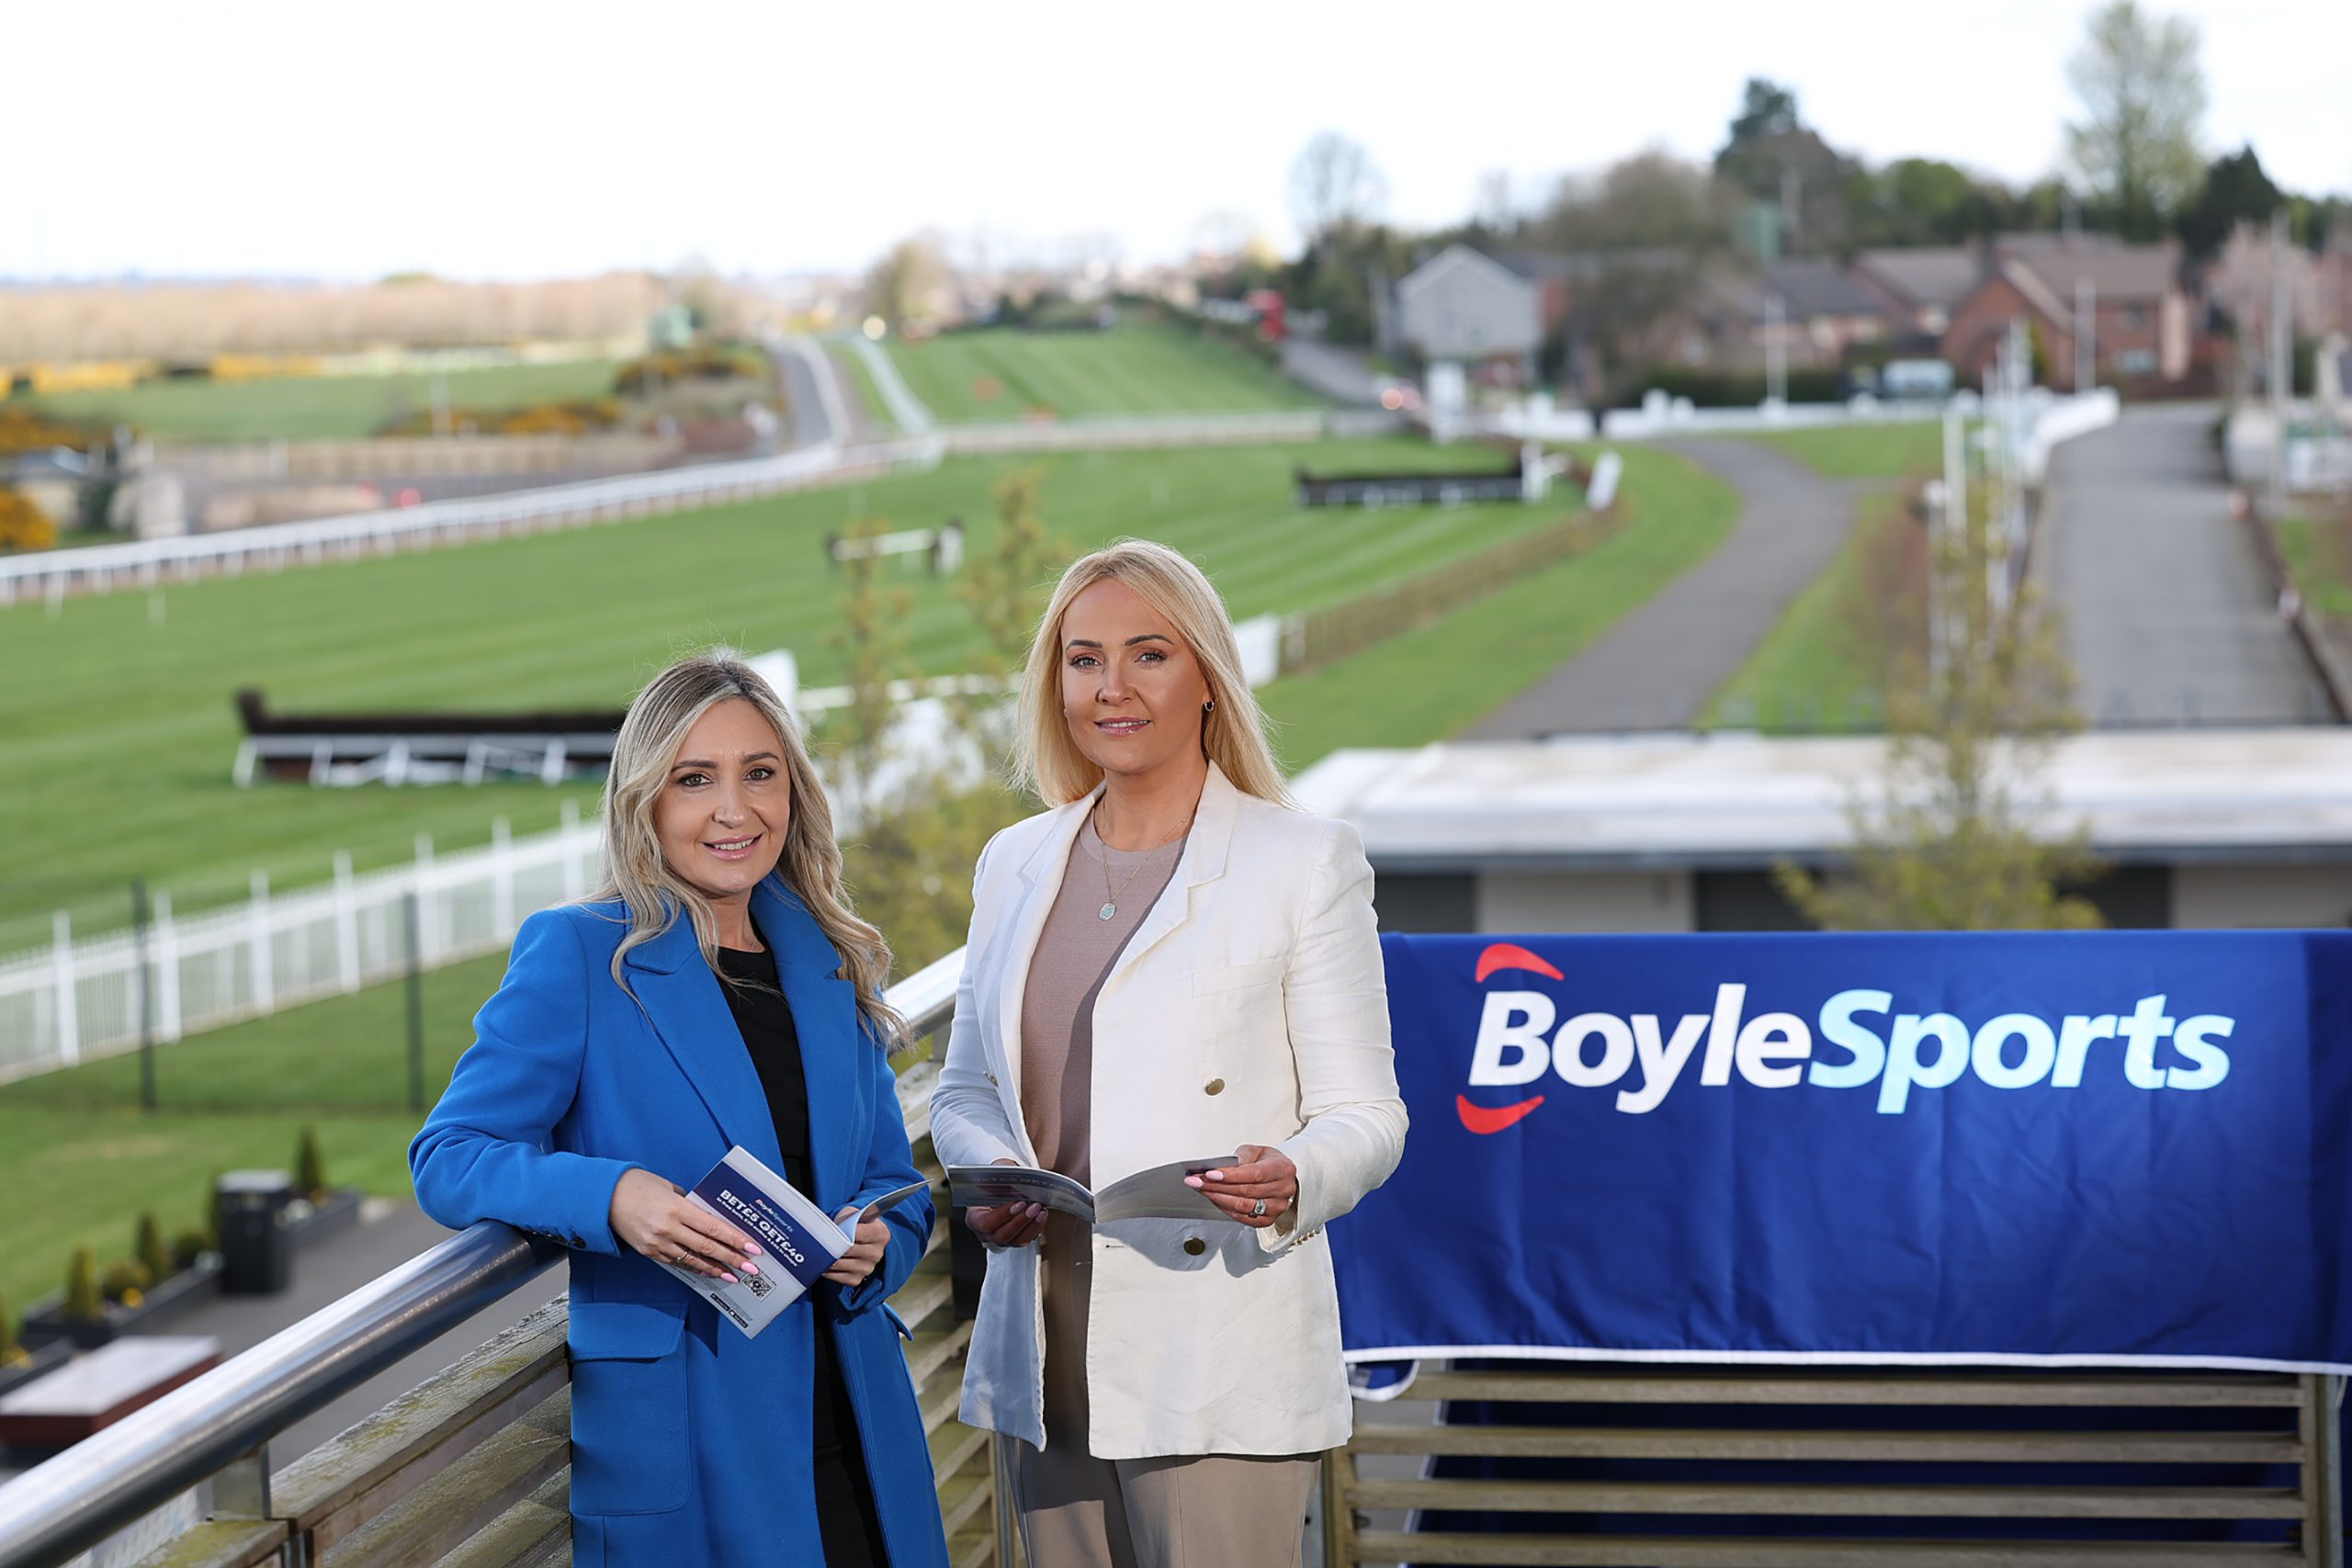 BoyleSports to sponsor Summer Festival of Racing at Down Royal